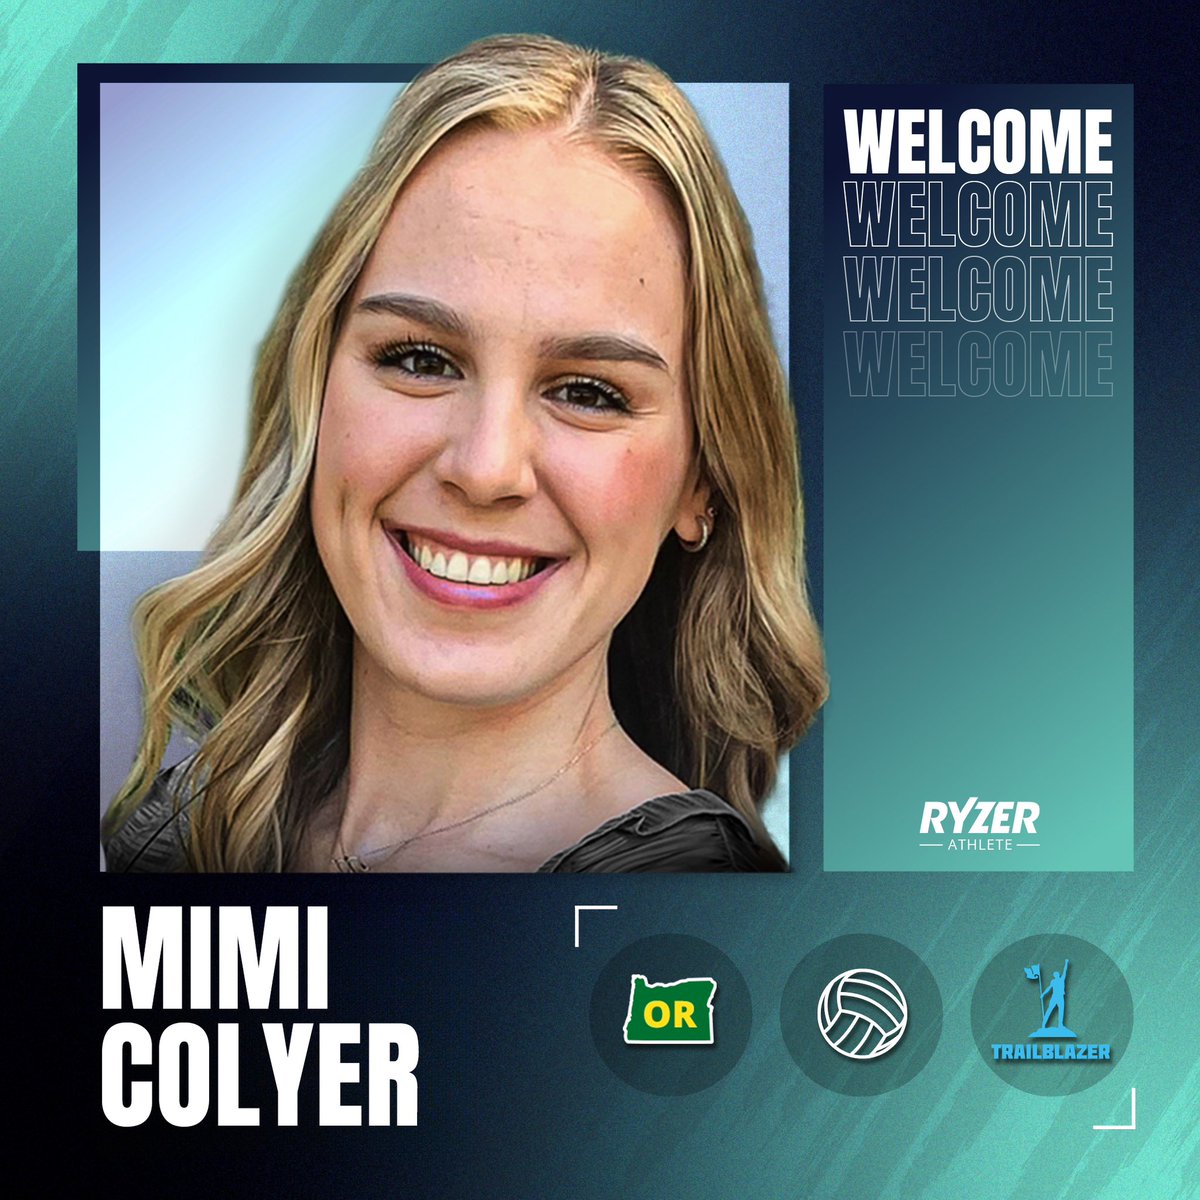 Meet Mimi Colyer, she is a sophomore and a D1 volleyball player. Her athlete type is a Trailblazer. She shows this by her high energy and enthusiasm! She is featured in 10 different Elite Mindset Training videos! #ryzer #basketball #EMT @mimi_colyer